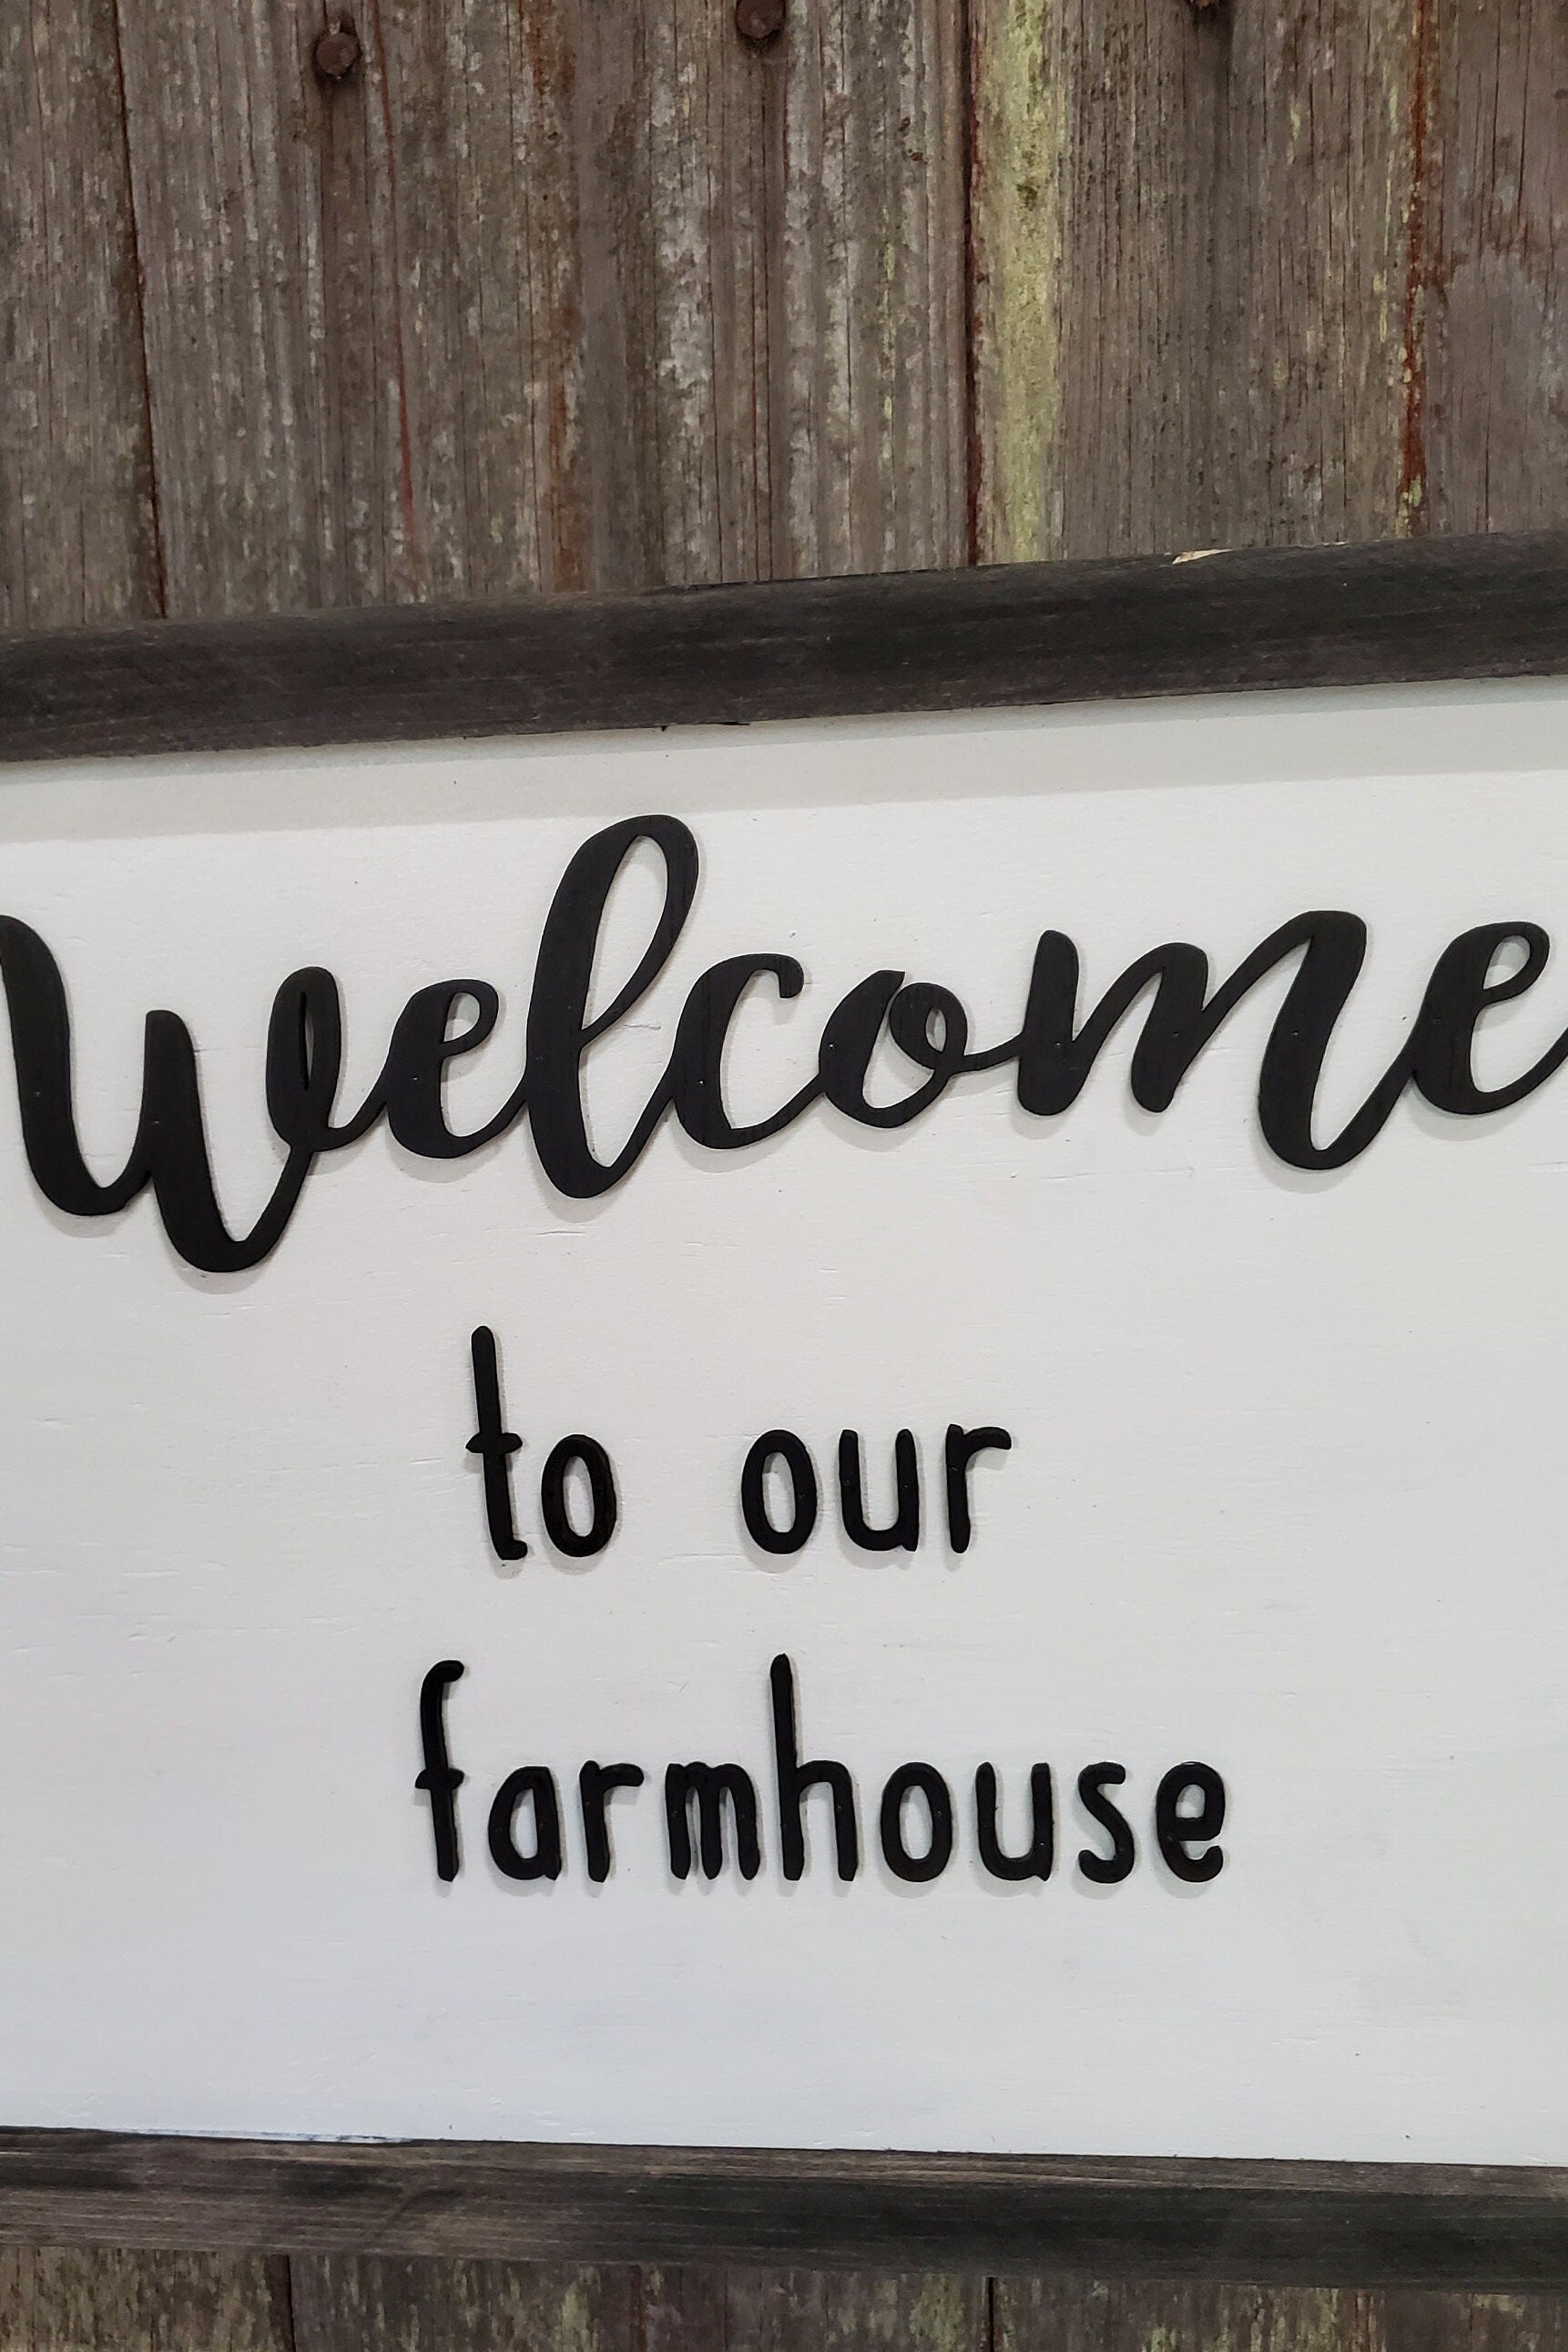 Welcome to Our Farmhouse Windmill Rustic Farmhouse Sign 3D Raised Black and White Country Framed Shabby Chic Wall Decor